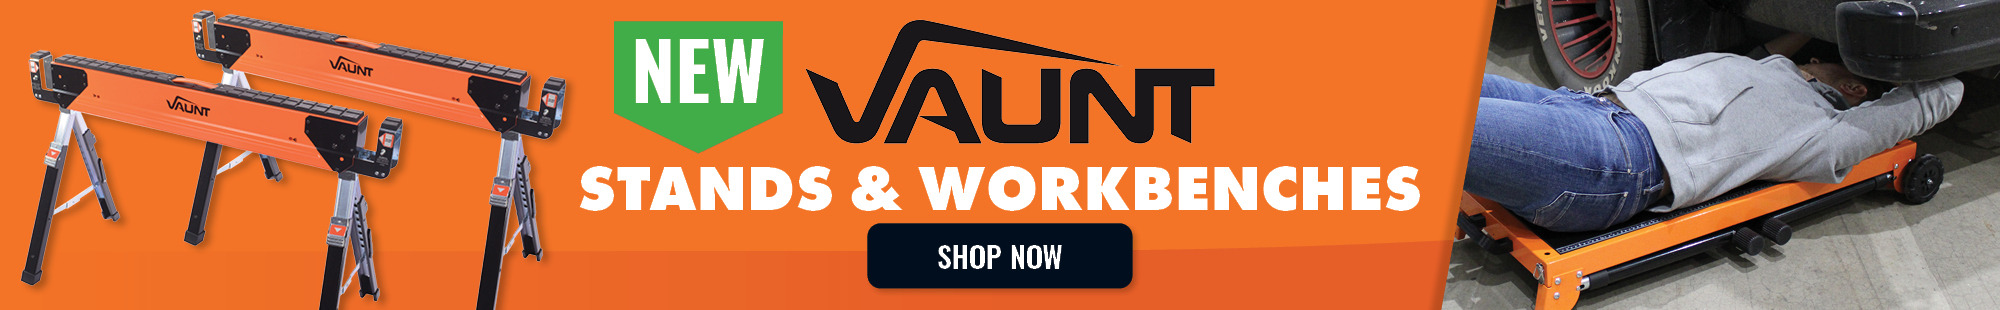 Vaunt Stands & Workbenches